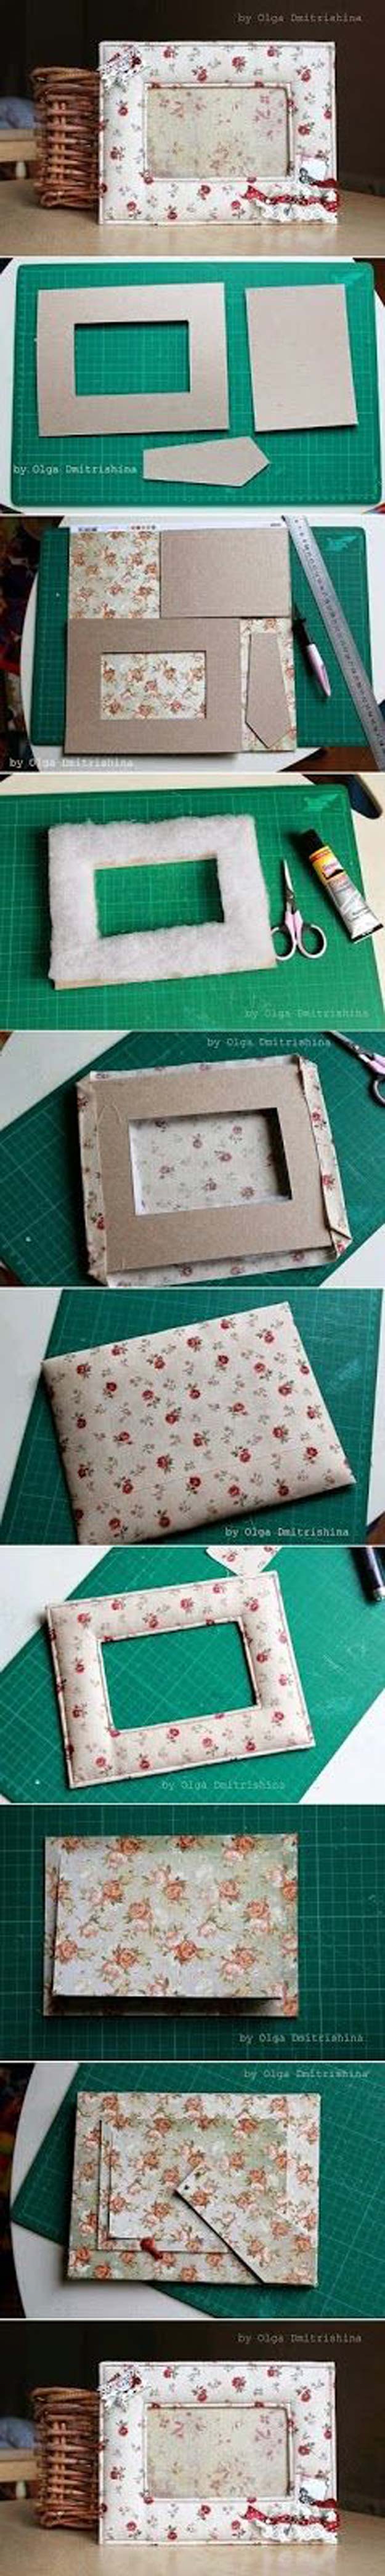 Best DIY Picture Frames and Photo Frame Ideas - Nice Soft Photo Frame - How To Make Cool Handmade Projects from Wood, Canvas, Instagram Photos. Creative Birthday Gifts, Fun Crafts for Friends and Wall Art Tutorials #diyideas #diygifts #teencrafts